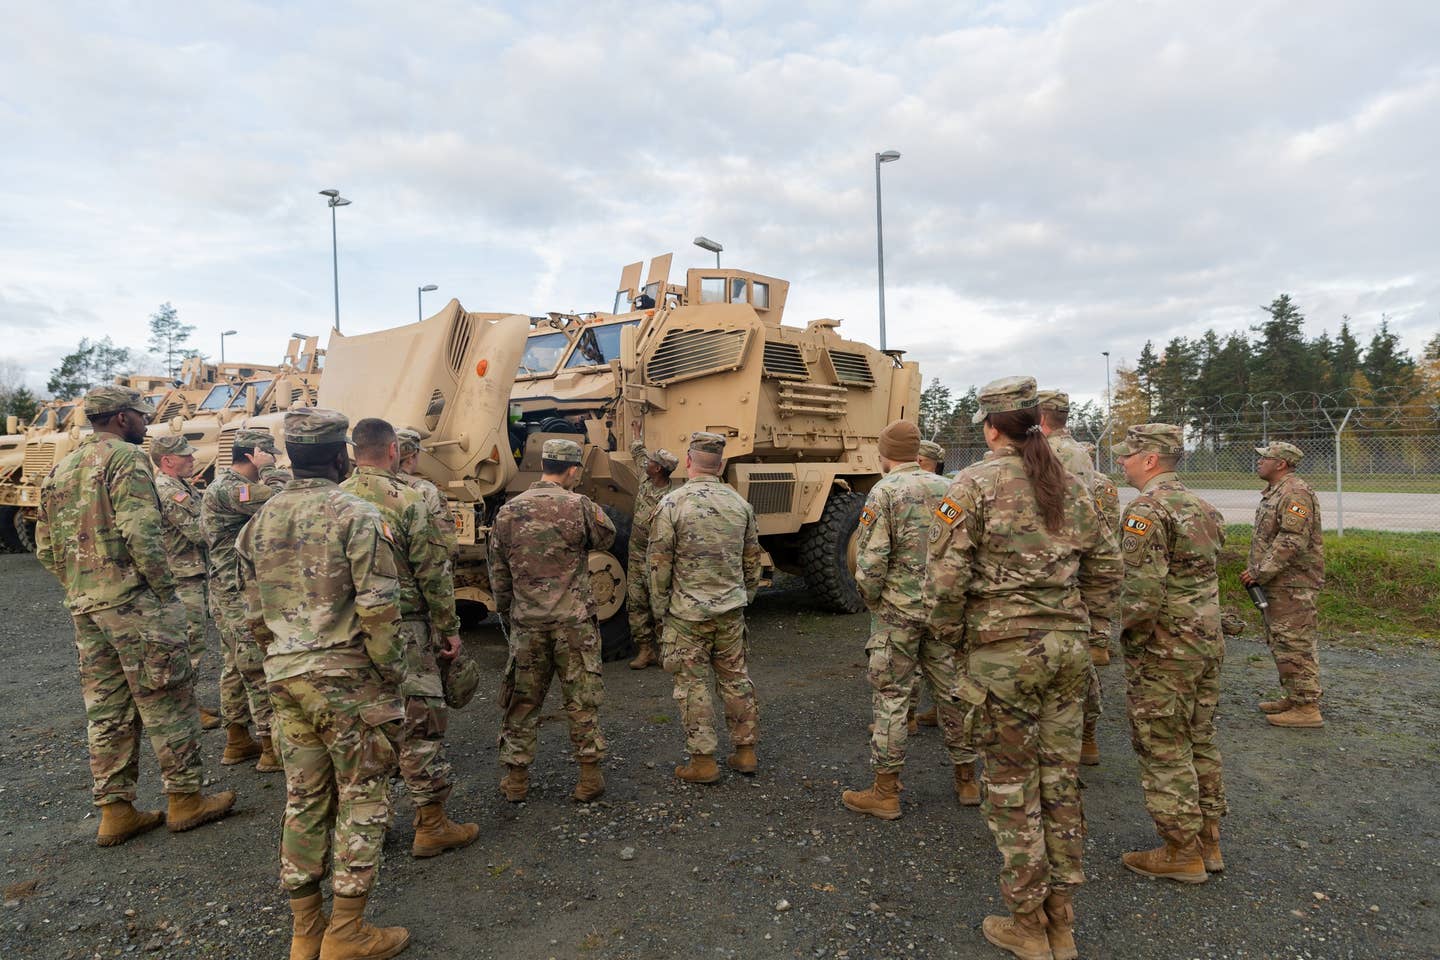 U.S. Army soldiers assigned to Task Force Orion, 27th Infantry Brigade Combat Team, New York Army National Guard, receive instructions on how to operate M1224 MaxxPro mine-resistant ambush-protected vehicles in Grafenwoehr, Germany, Nov. 6, 2022. (U.S. National Guard photo by Staff Sgt. Jordan Sivayavirojna)